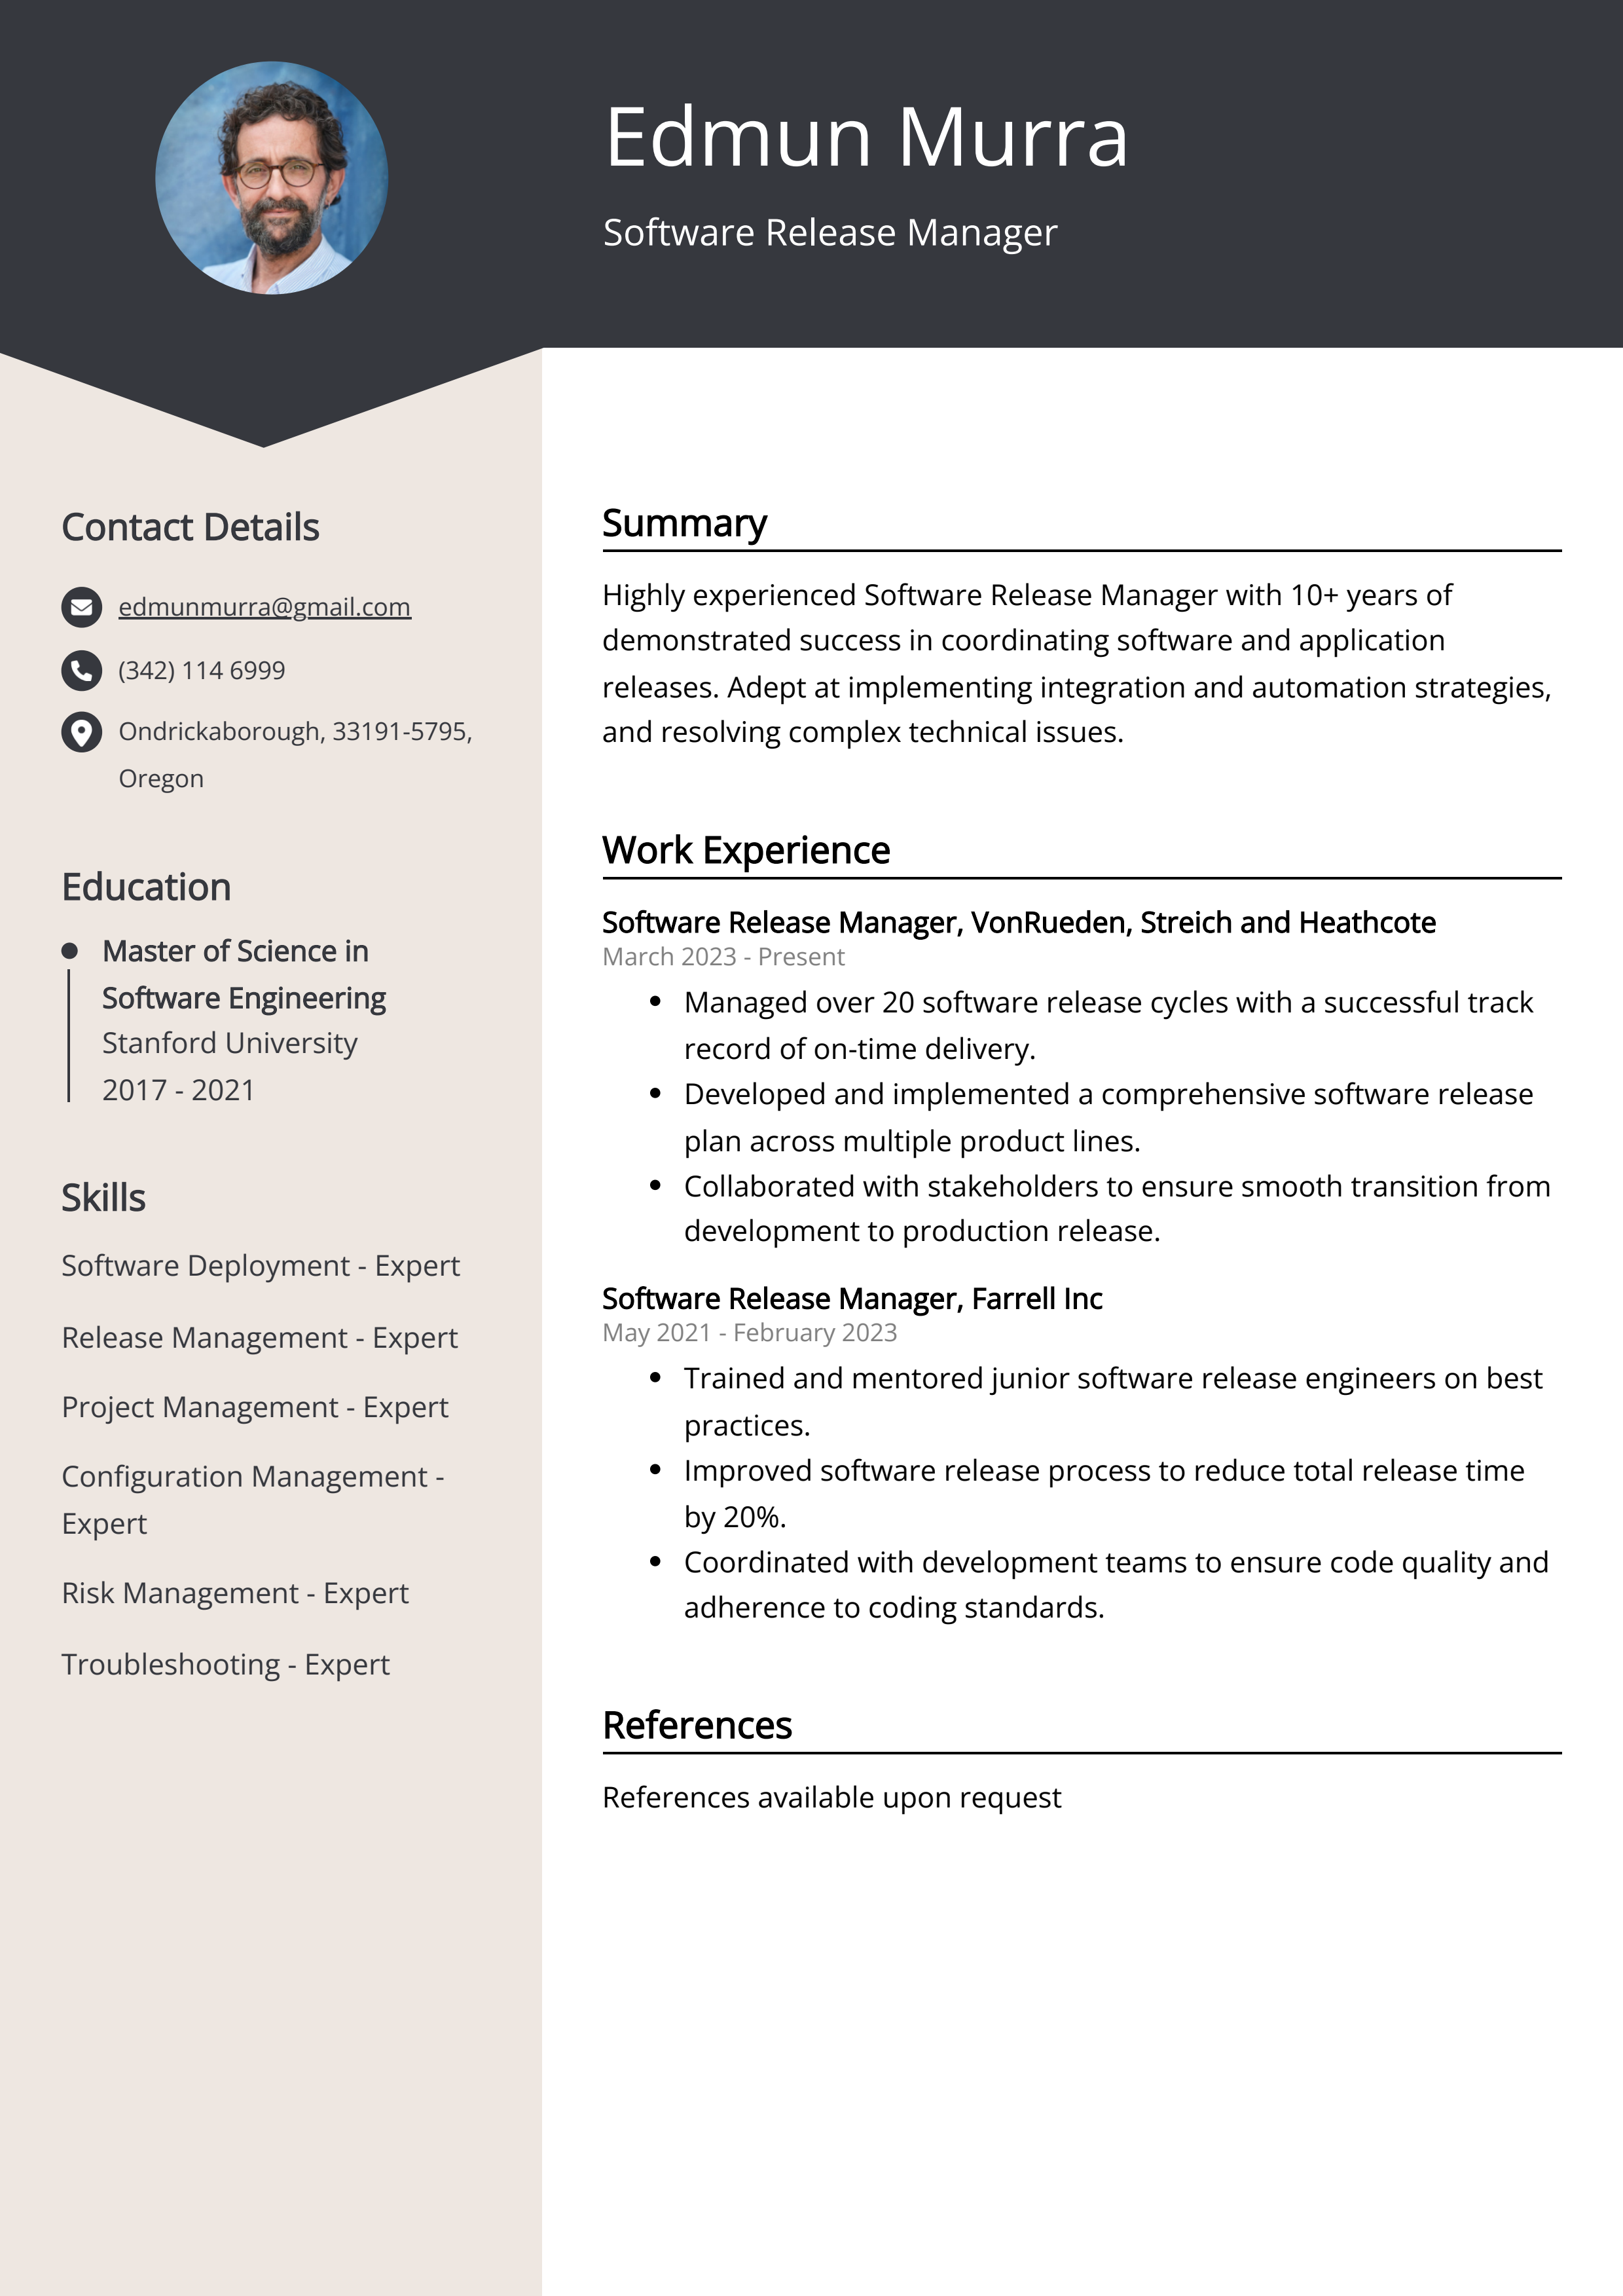 Software Release Manager CV Example